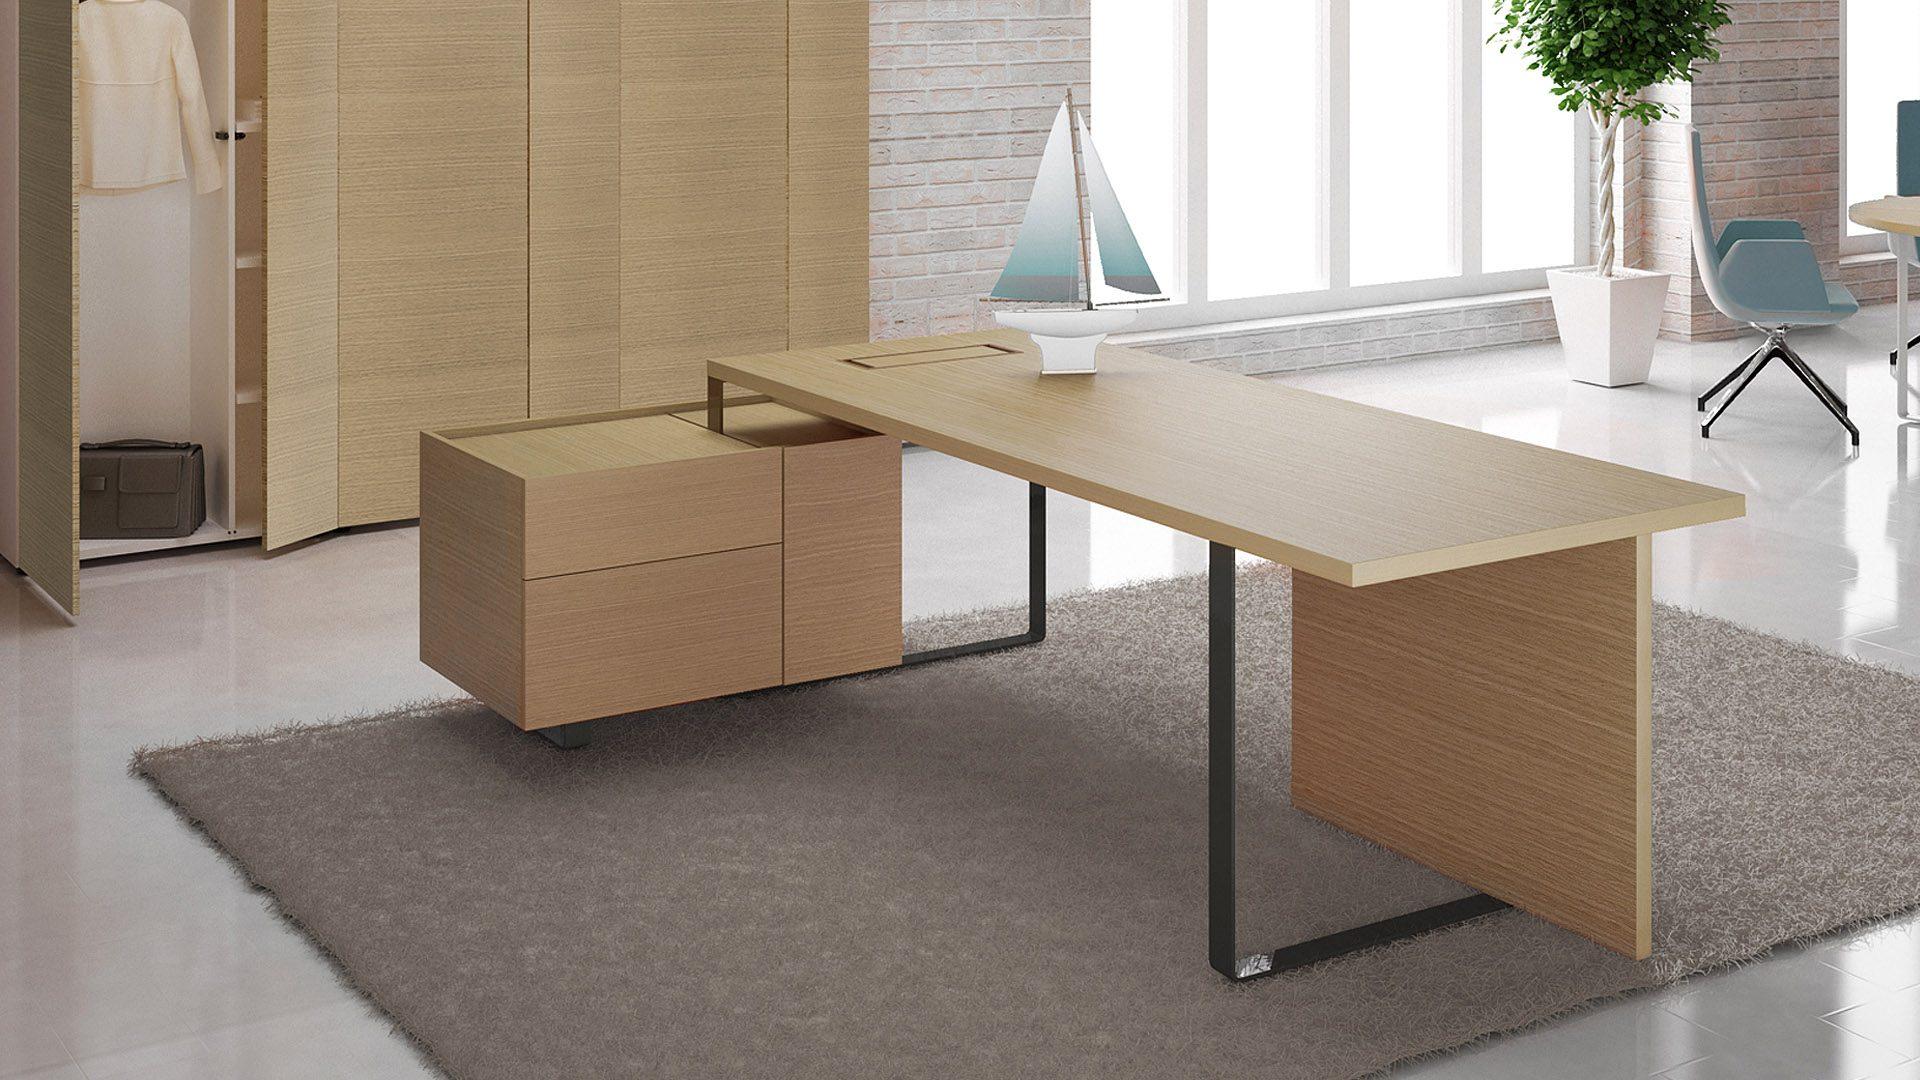 Plana executive desk with storage cabinets